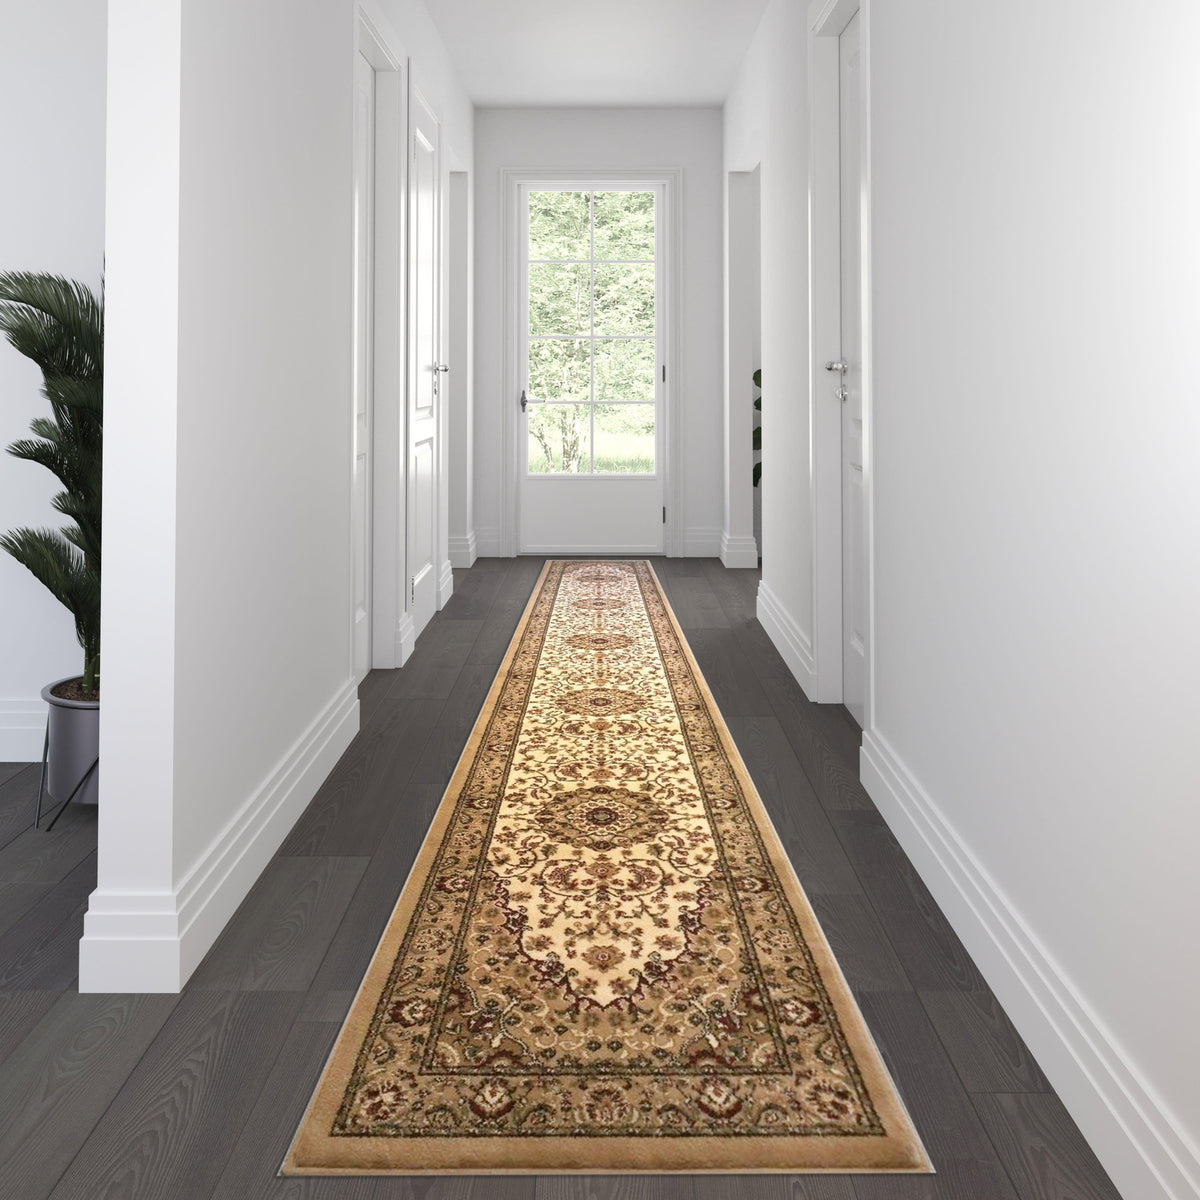 Ivory,3' x 20' |#| Multipurpose Persian Style Olefin Medallion Motif Area Rug in Ivory - 3' x 20'